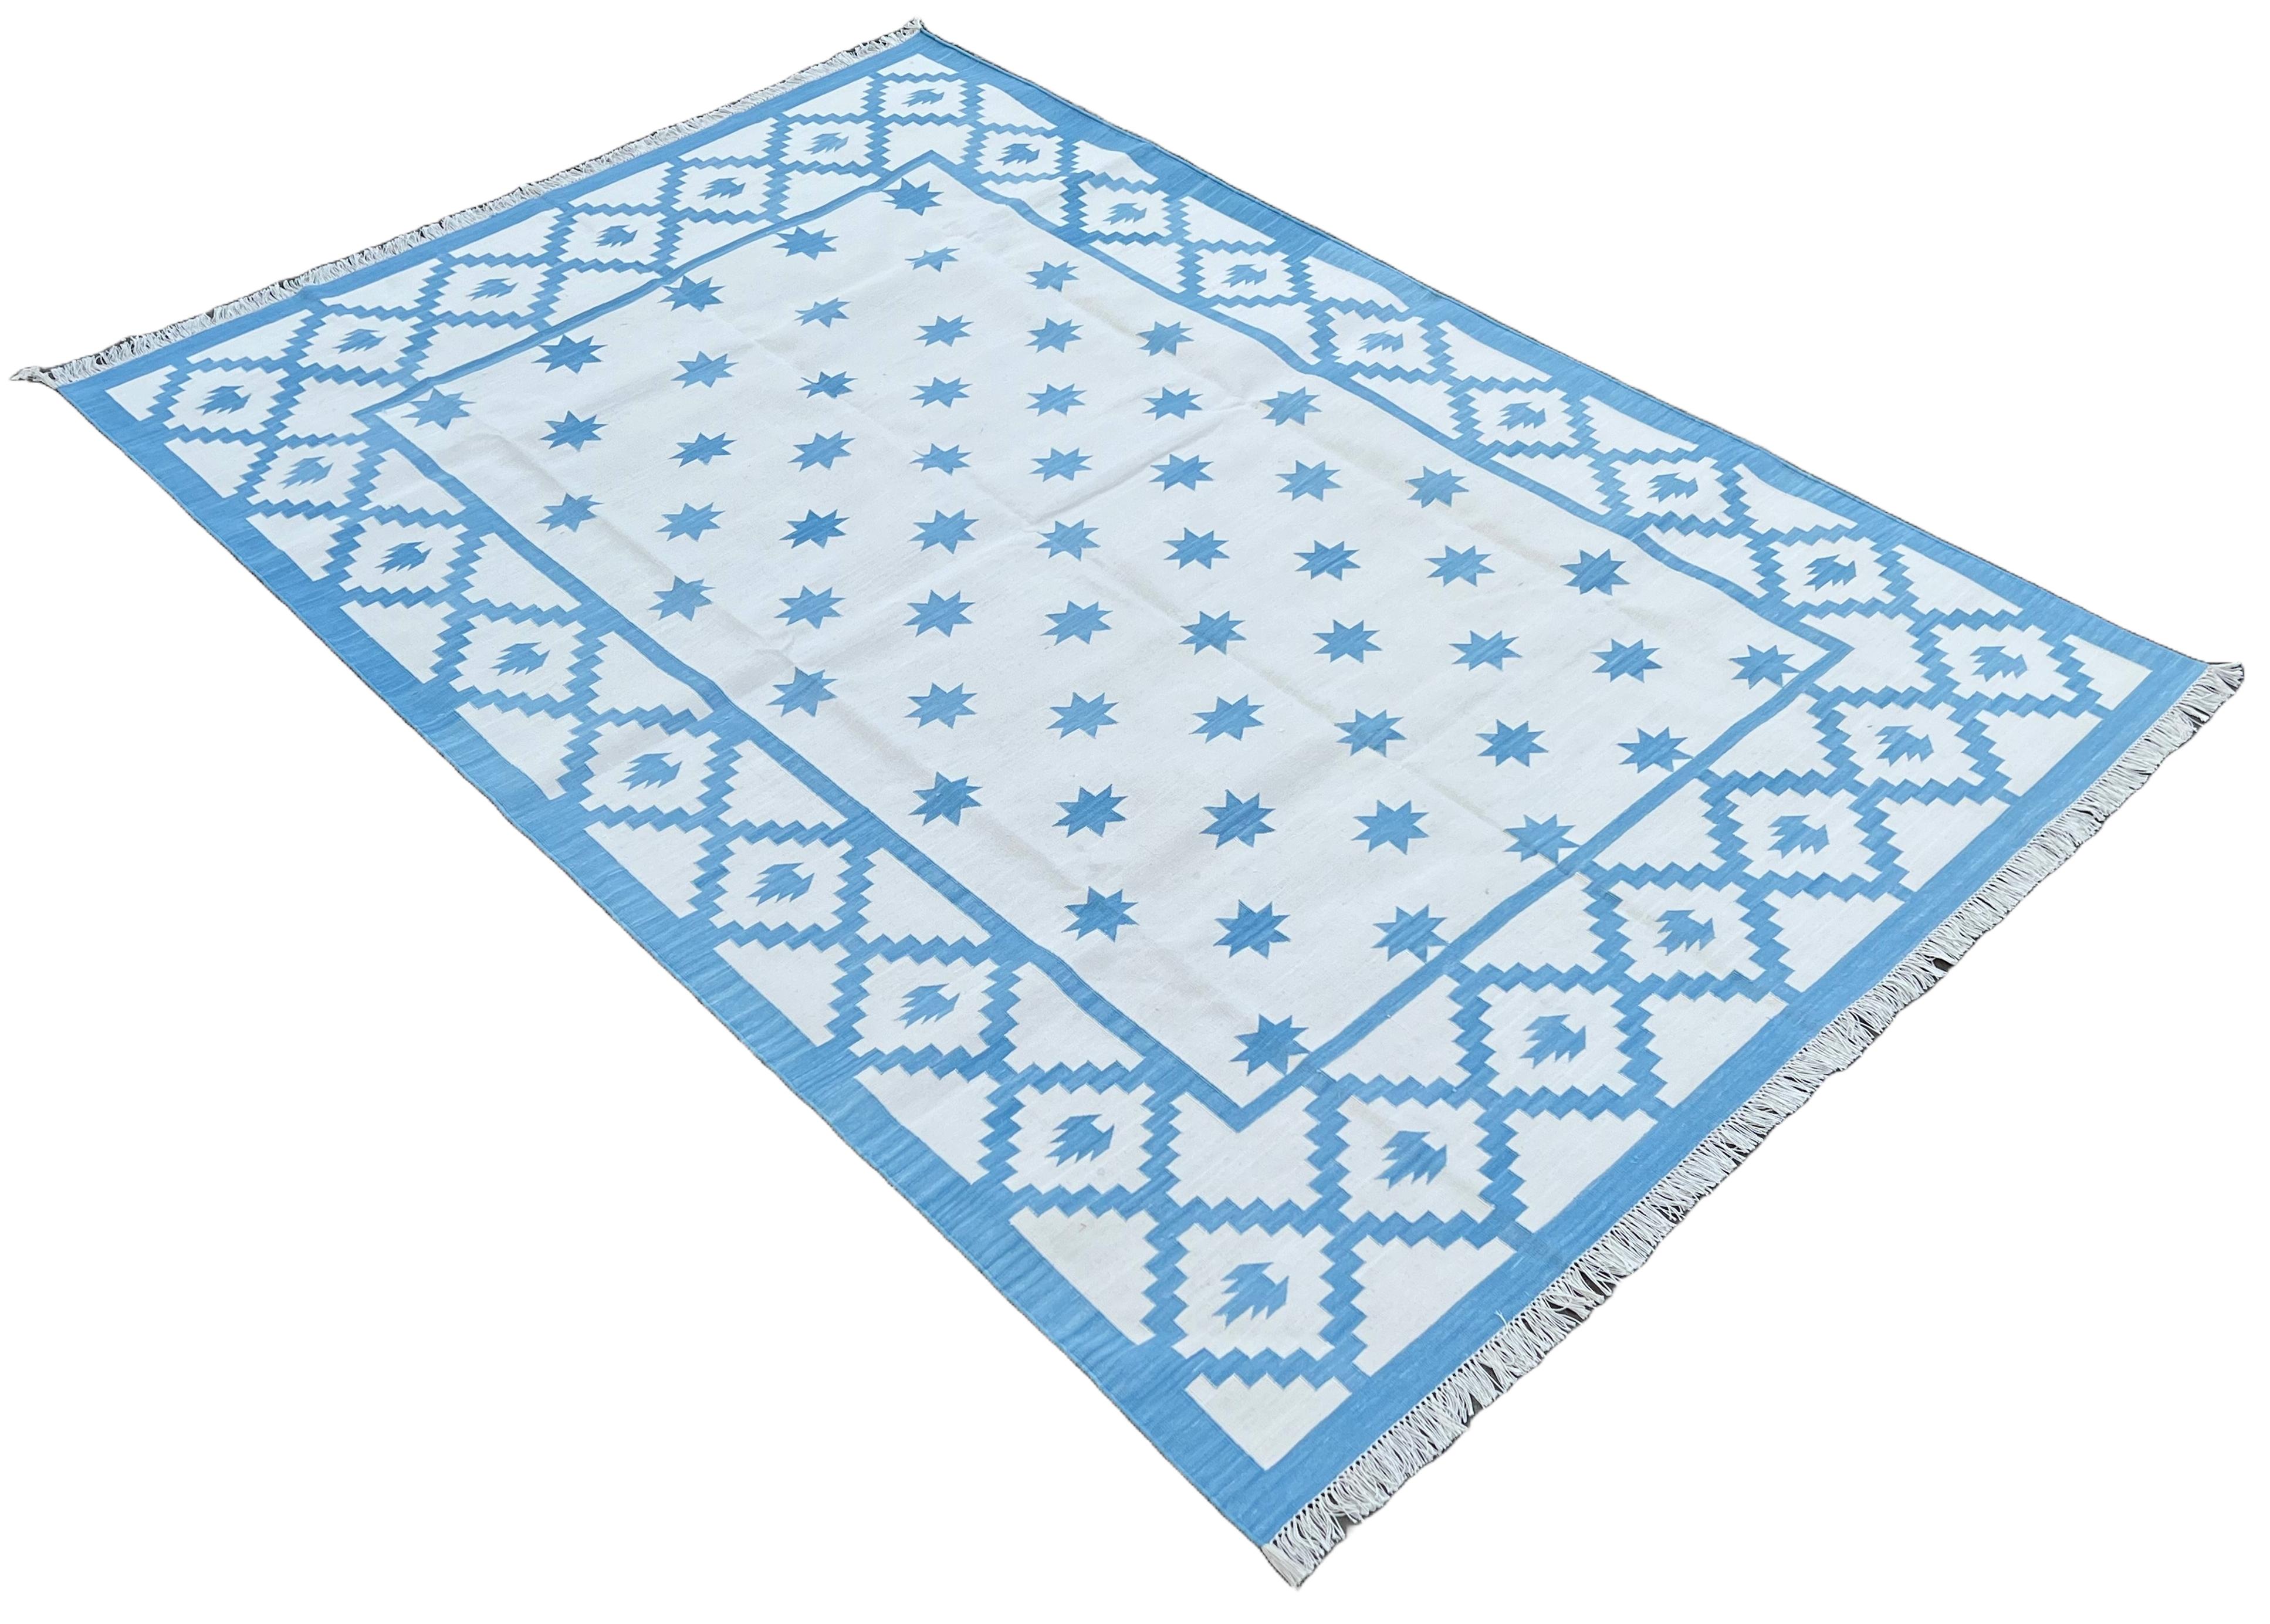 Cotton Vegetable Dyed Reversible Sky Blue And White Indian Star Geometric Rug - 6'x9'
These special flat-weave dhurries are hand-woven with 15 ply 100% cotton yarn. Due to the special manufacturing techniques used to create our rugs, the size and